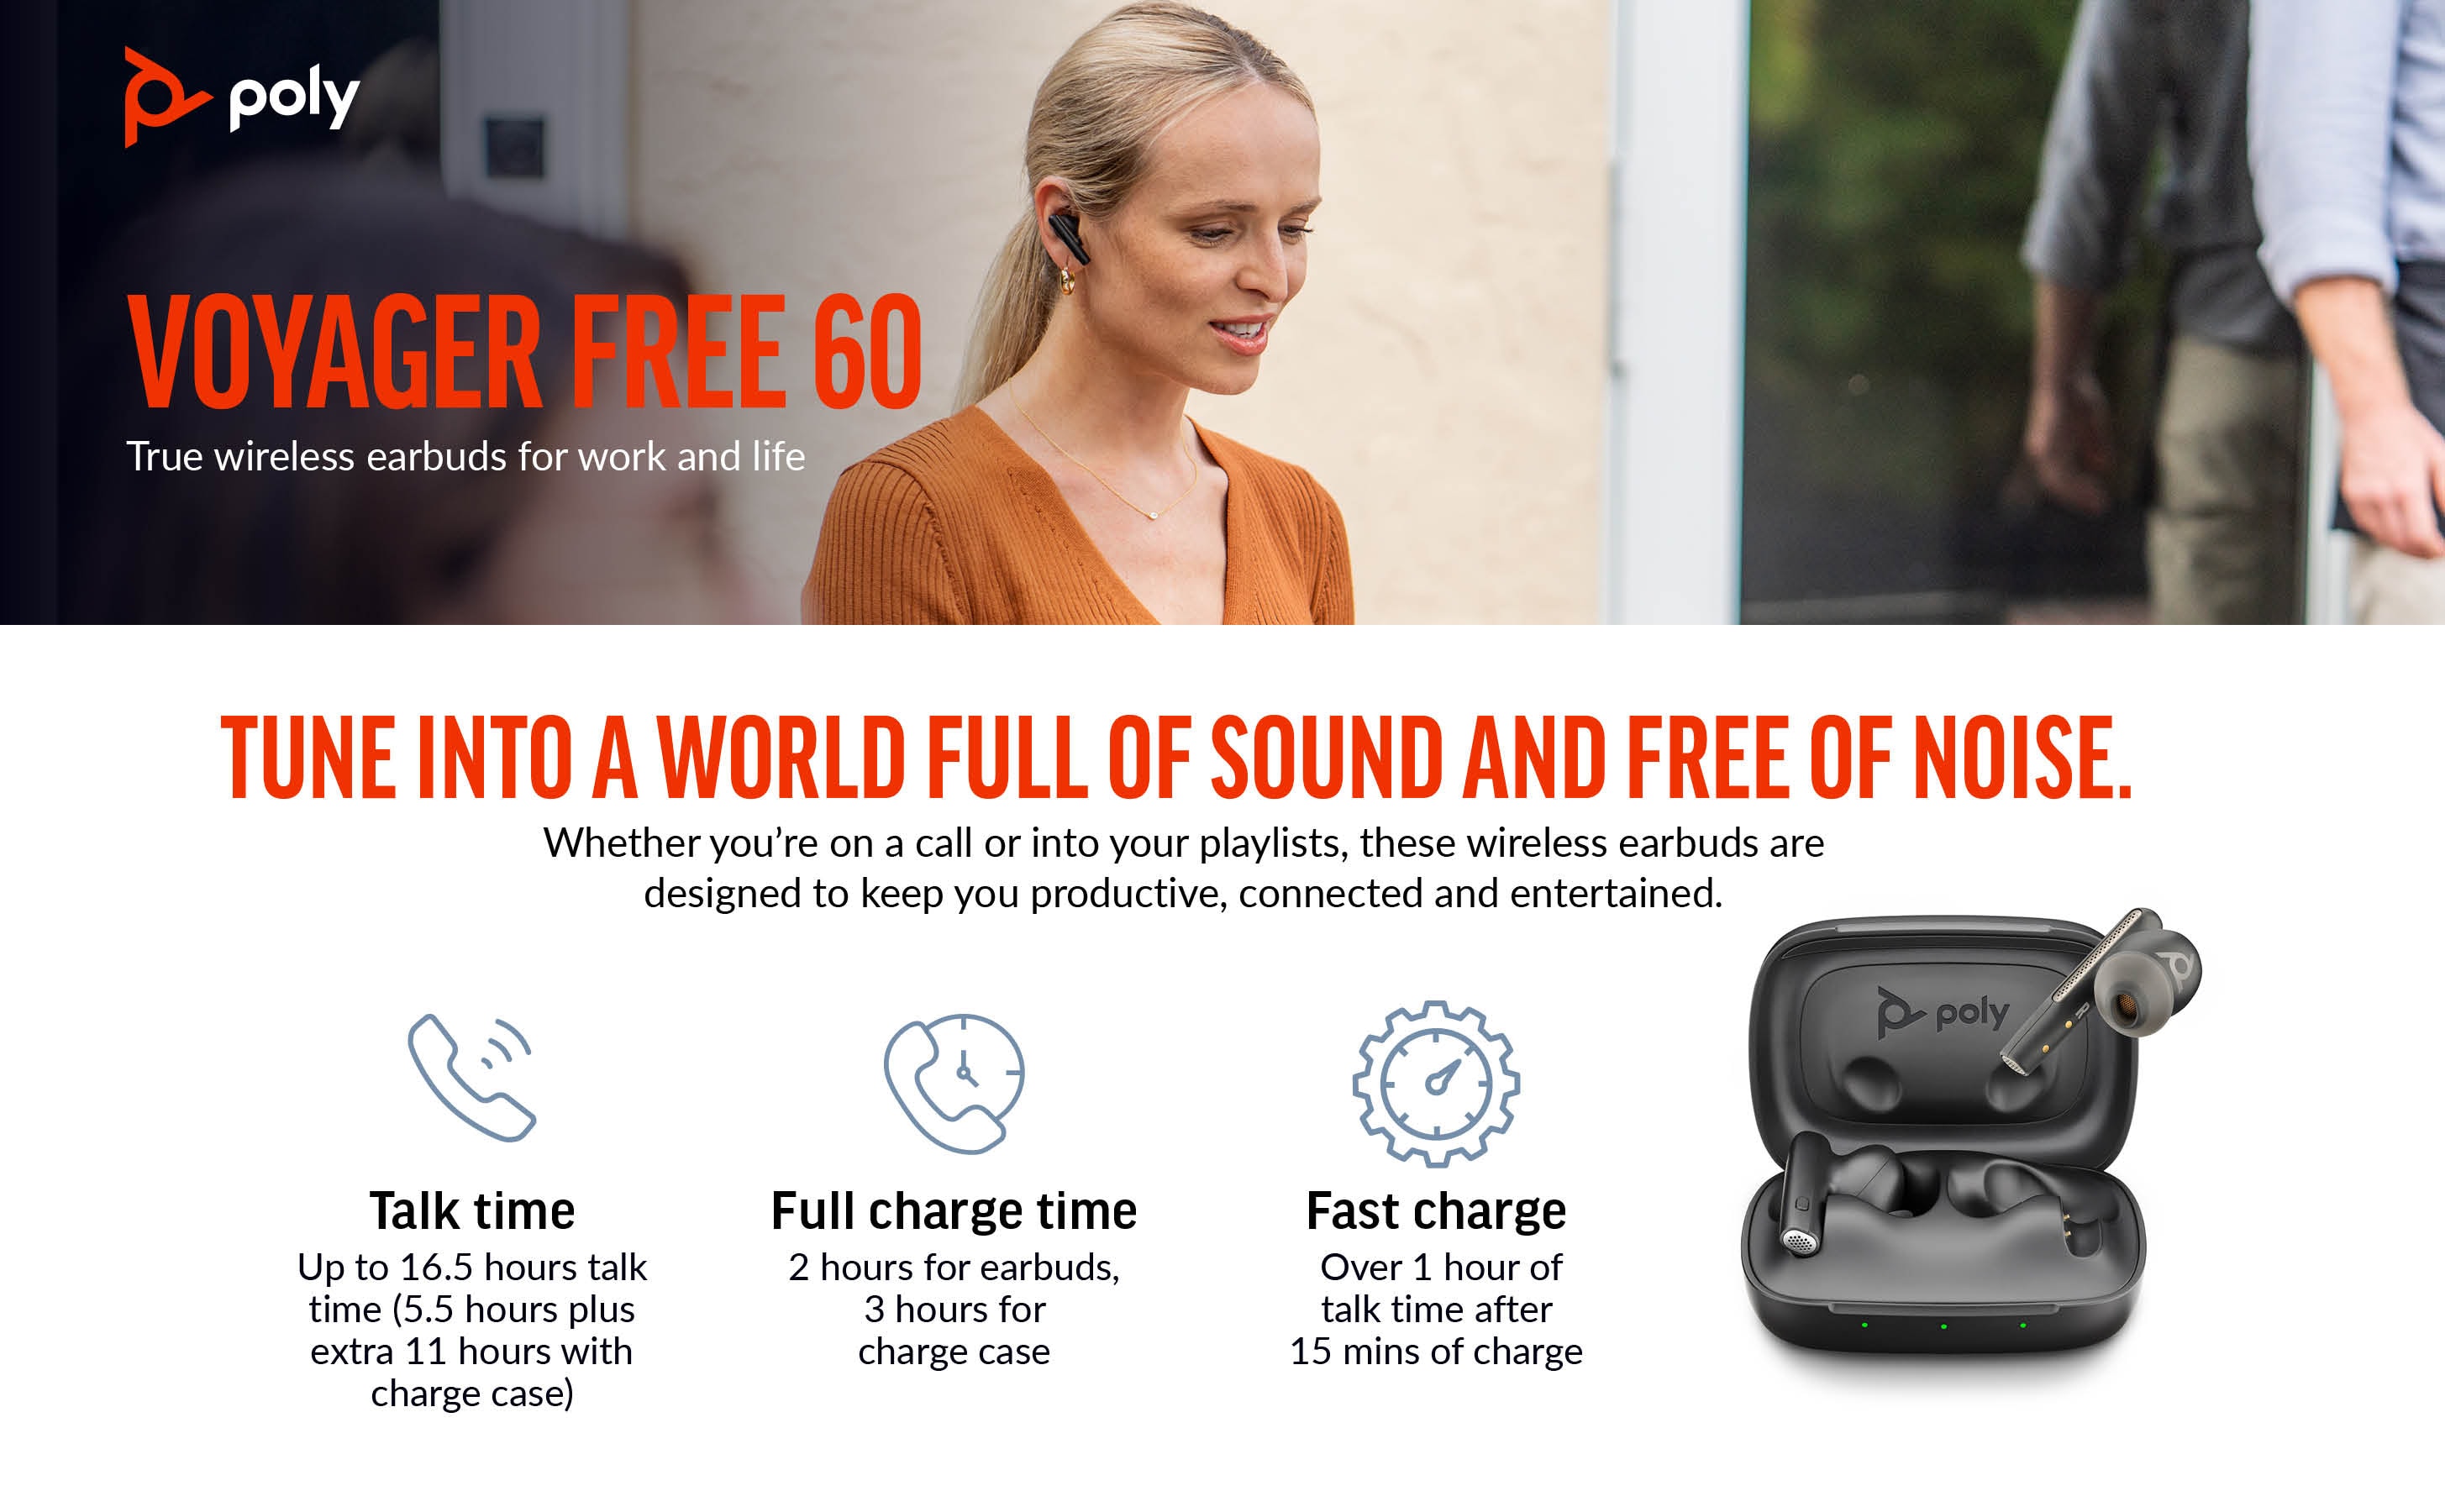 Case Poly Earbuds +Basic Black Carbon Free Charge Voyager 60